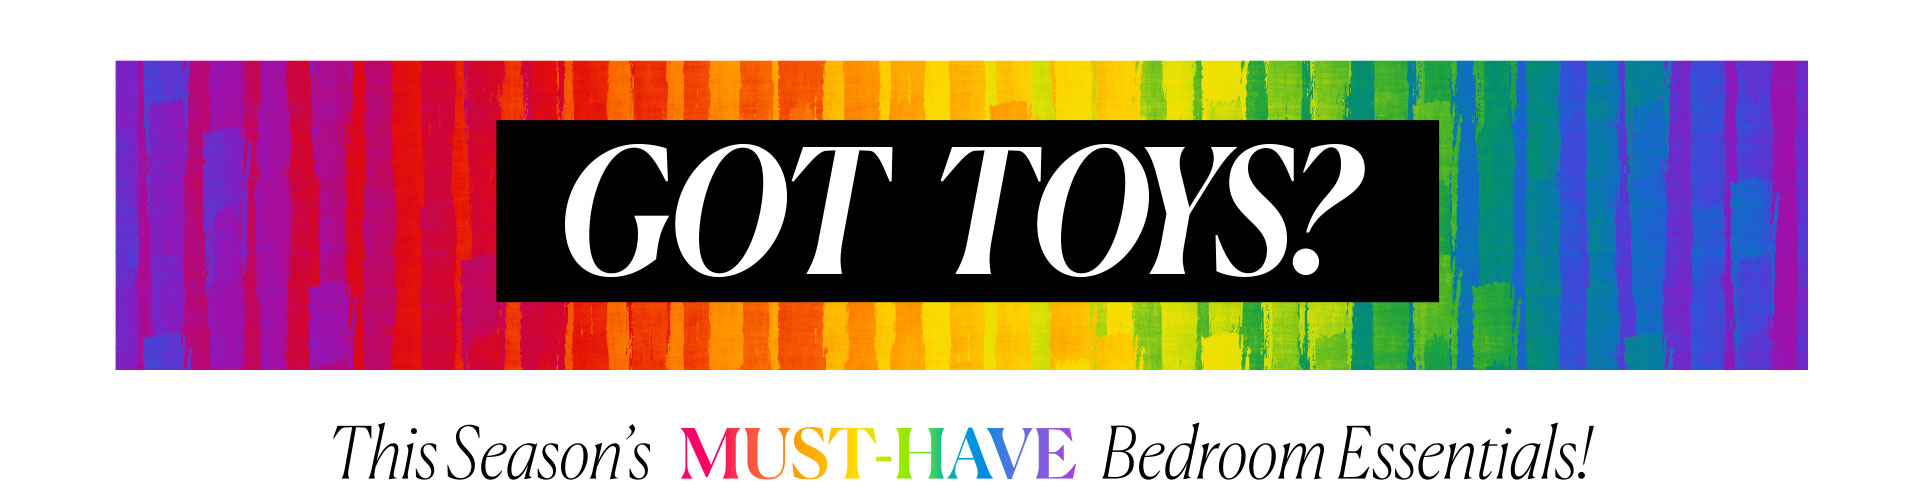 Got Toys? This Season's MUST-HAVE Bedroom Essentials!